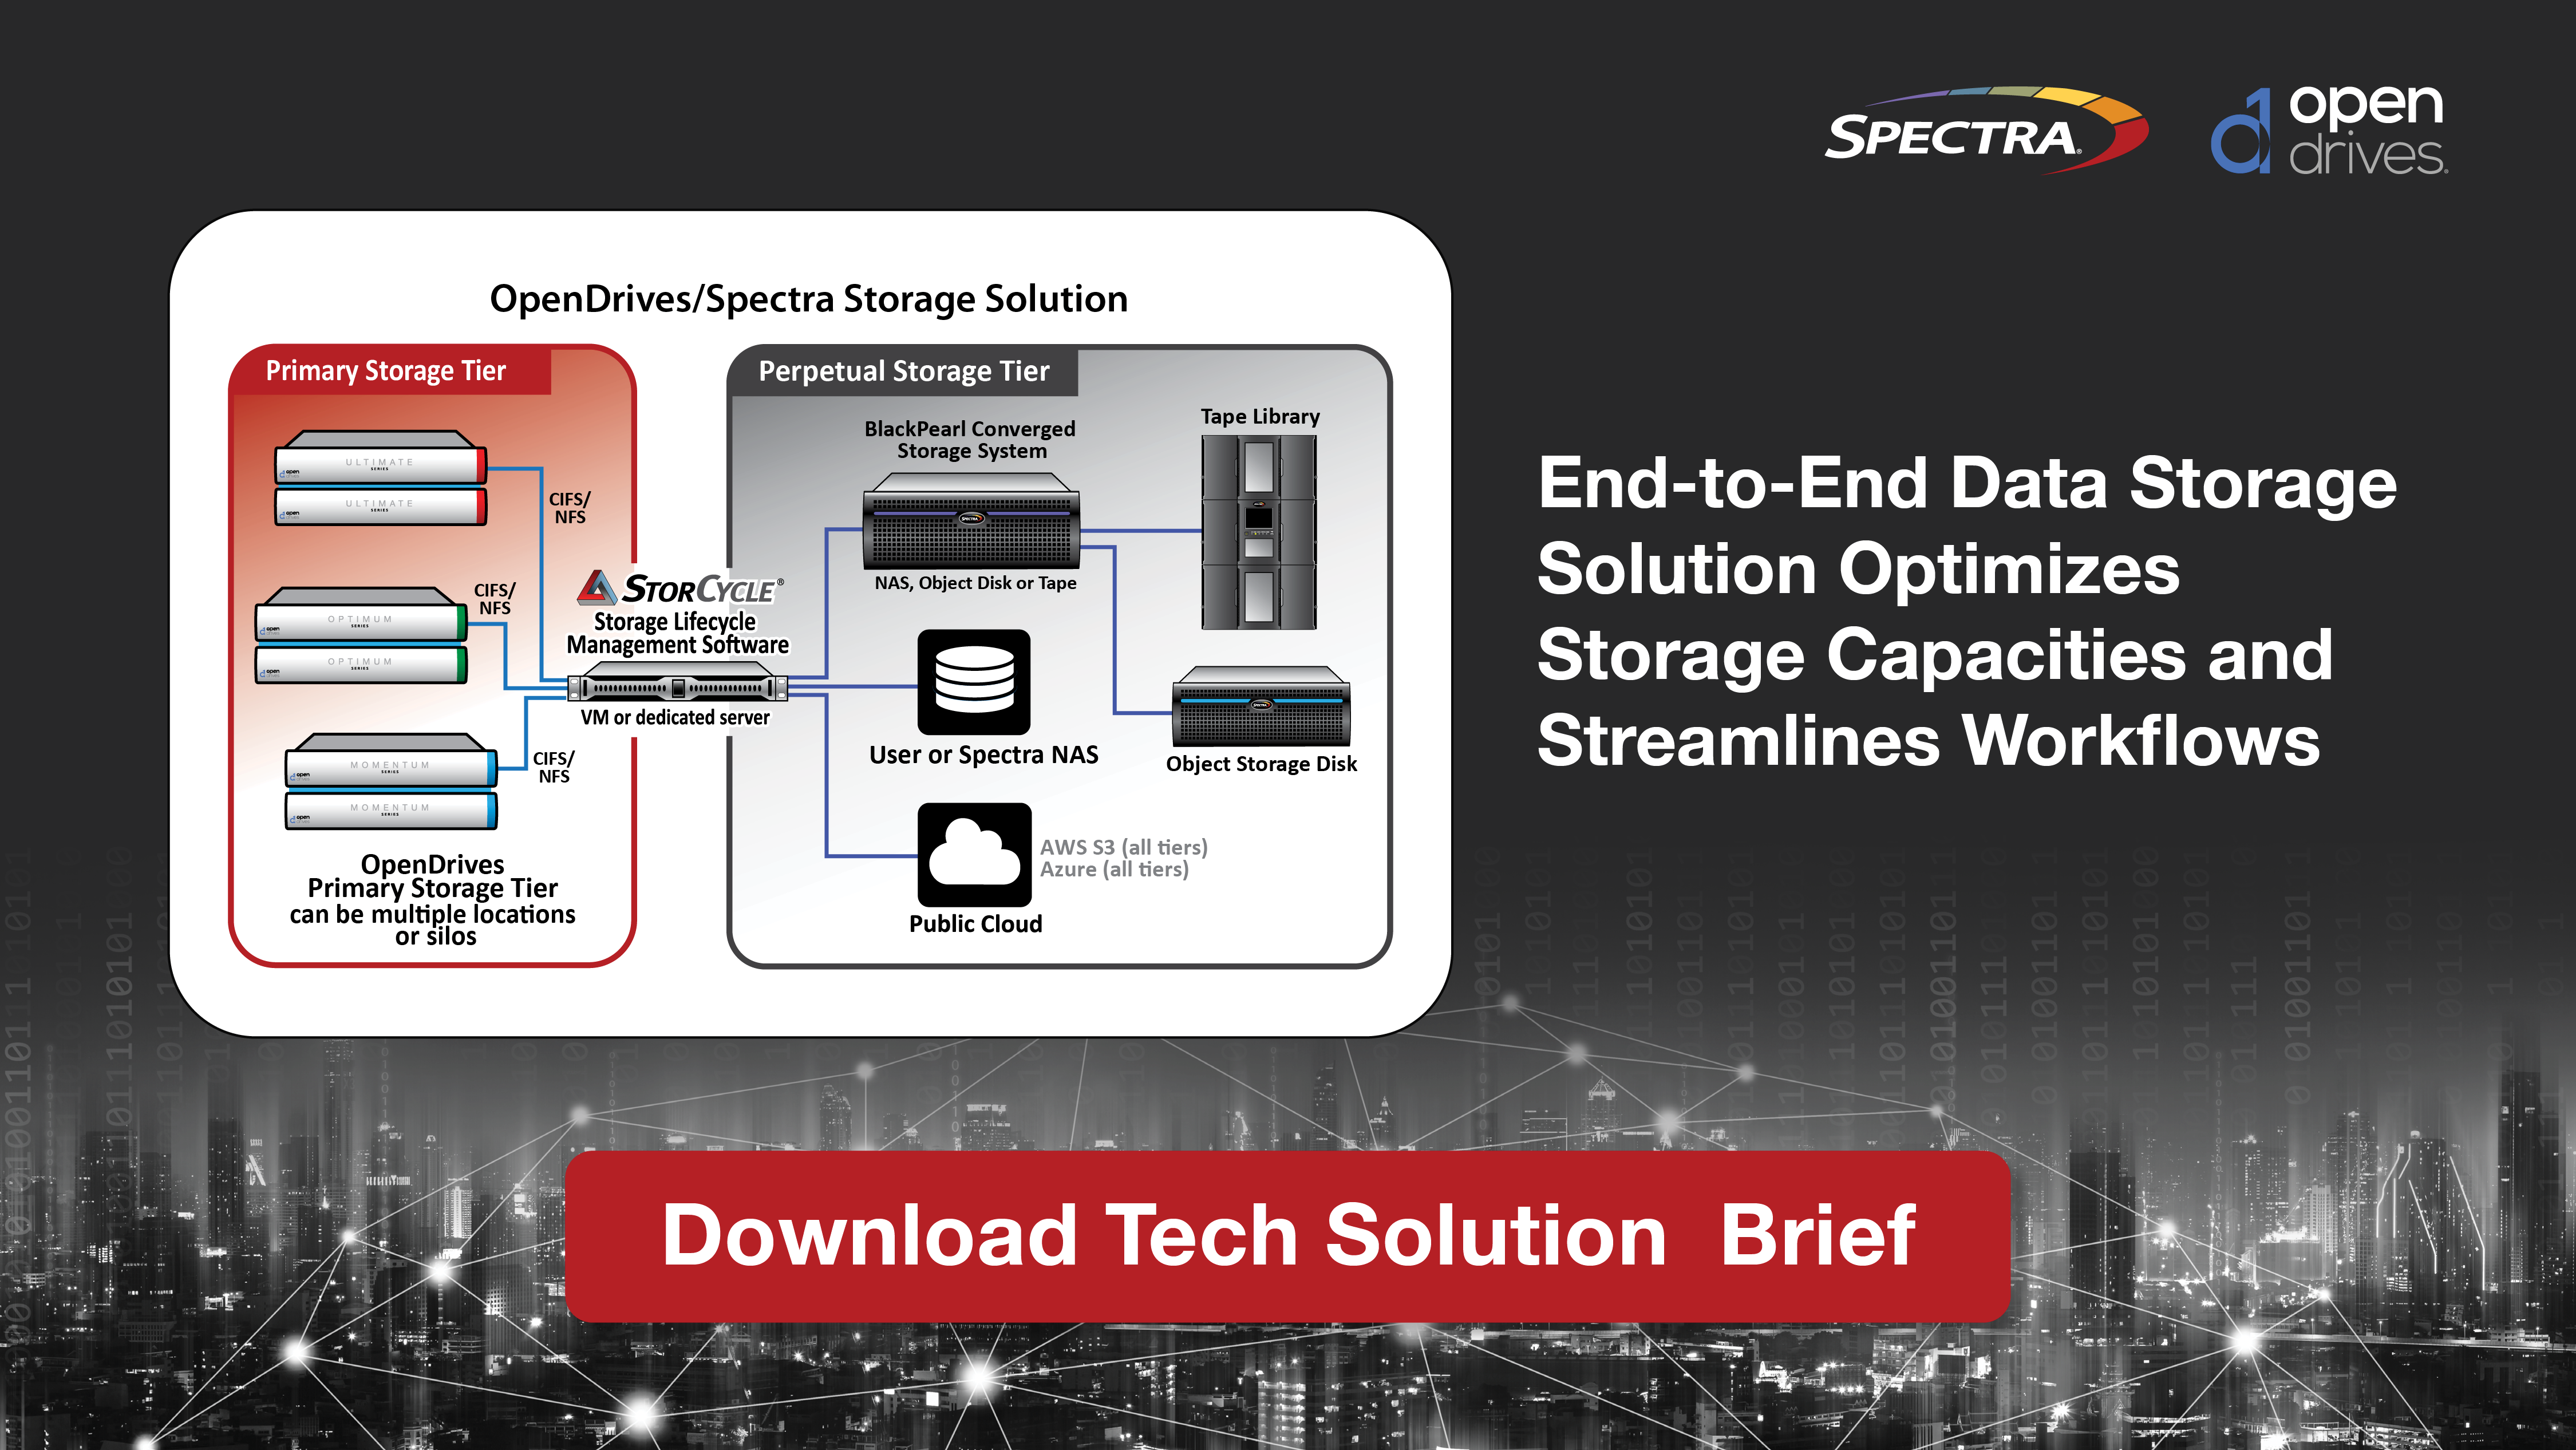 Spectra StorCycle and OpenDrives technical solution brief promo